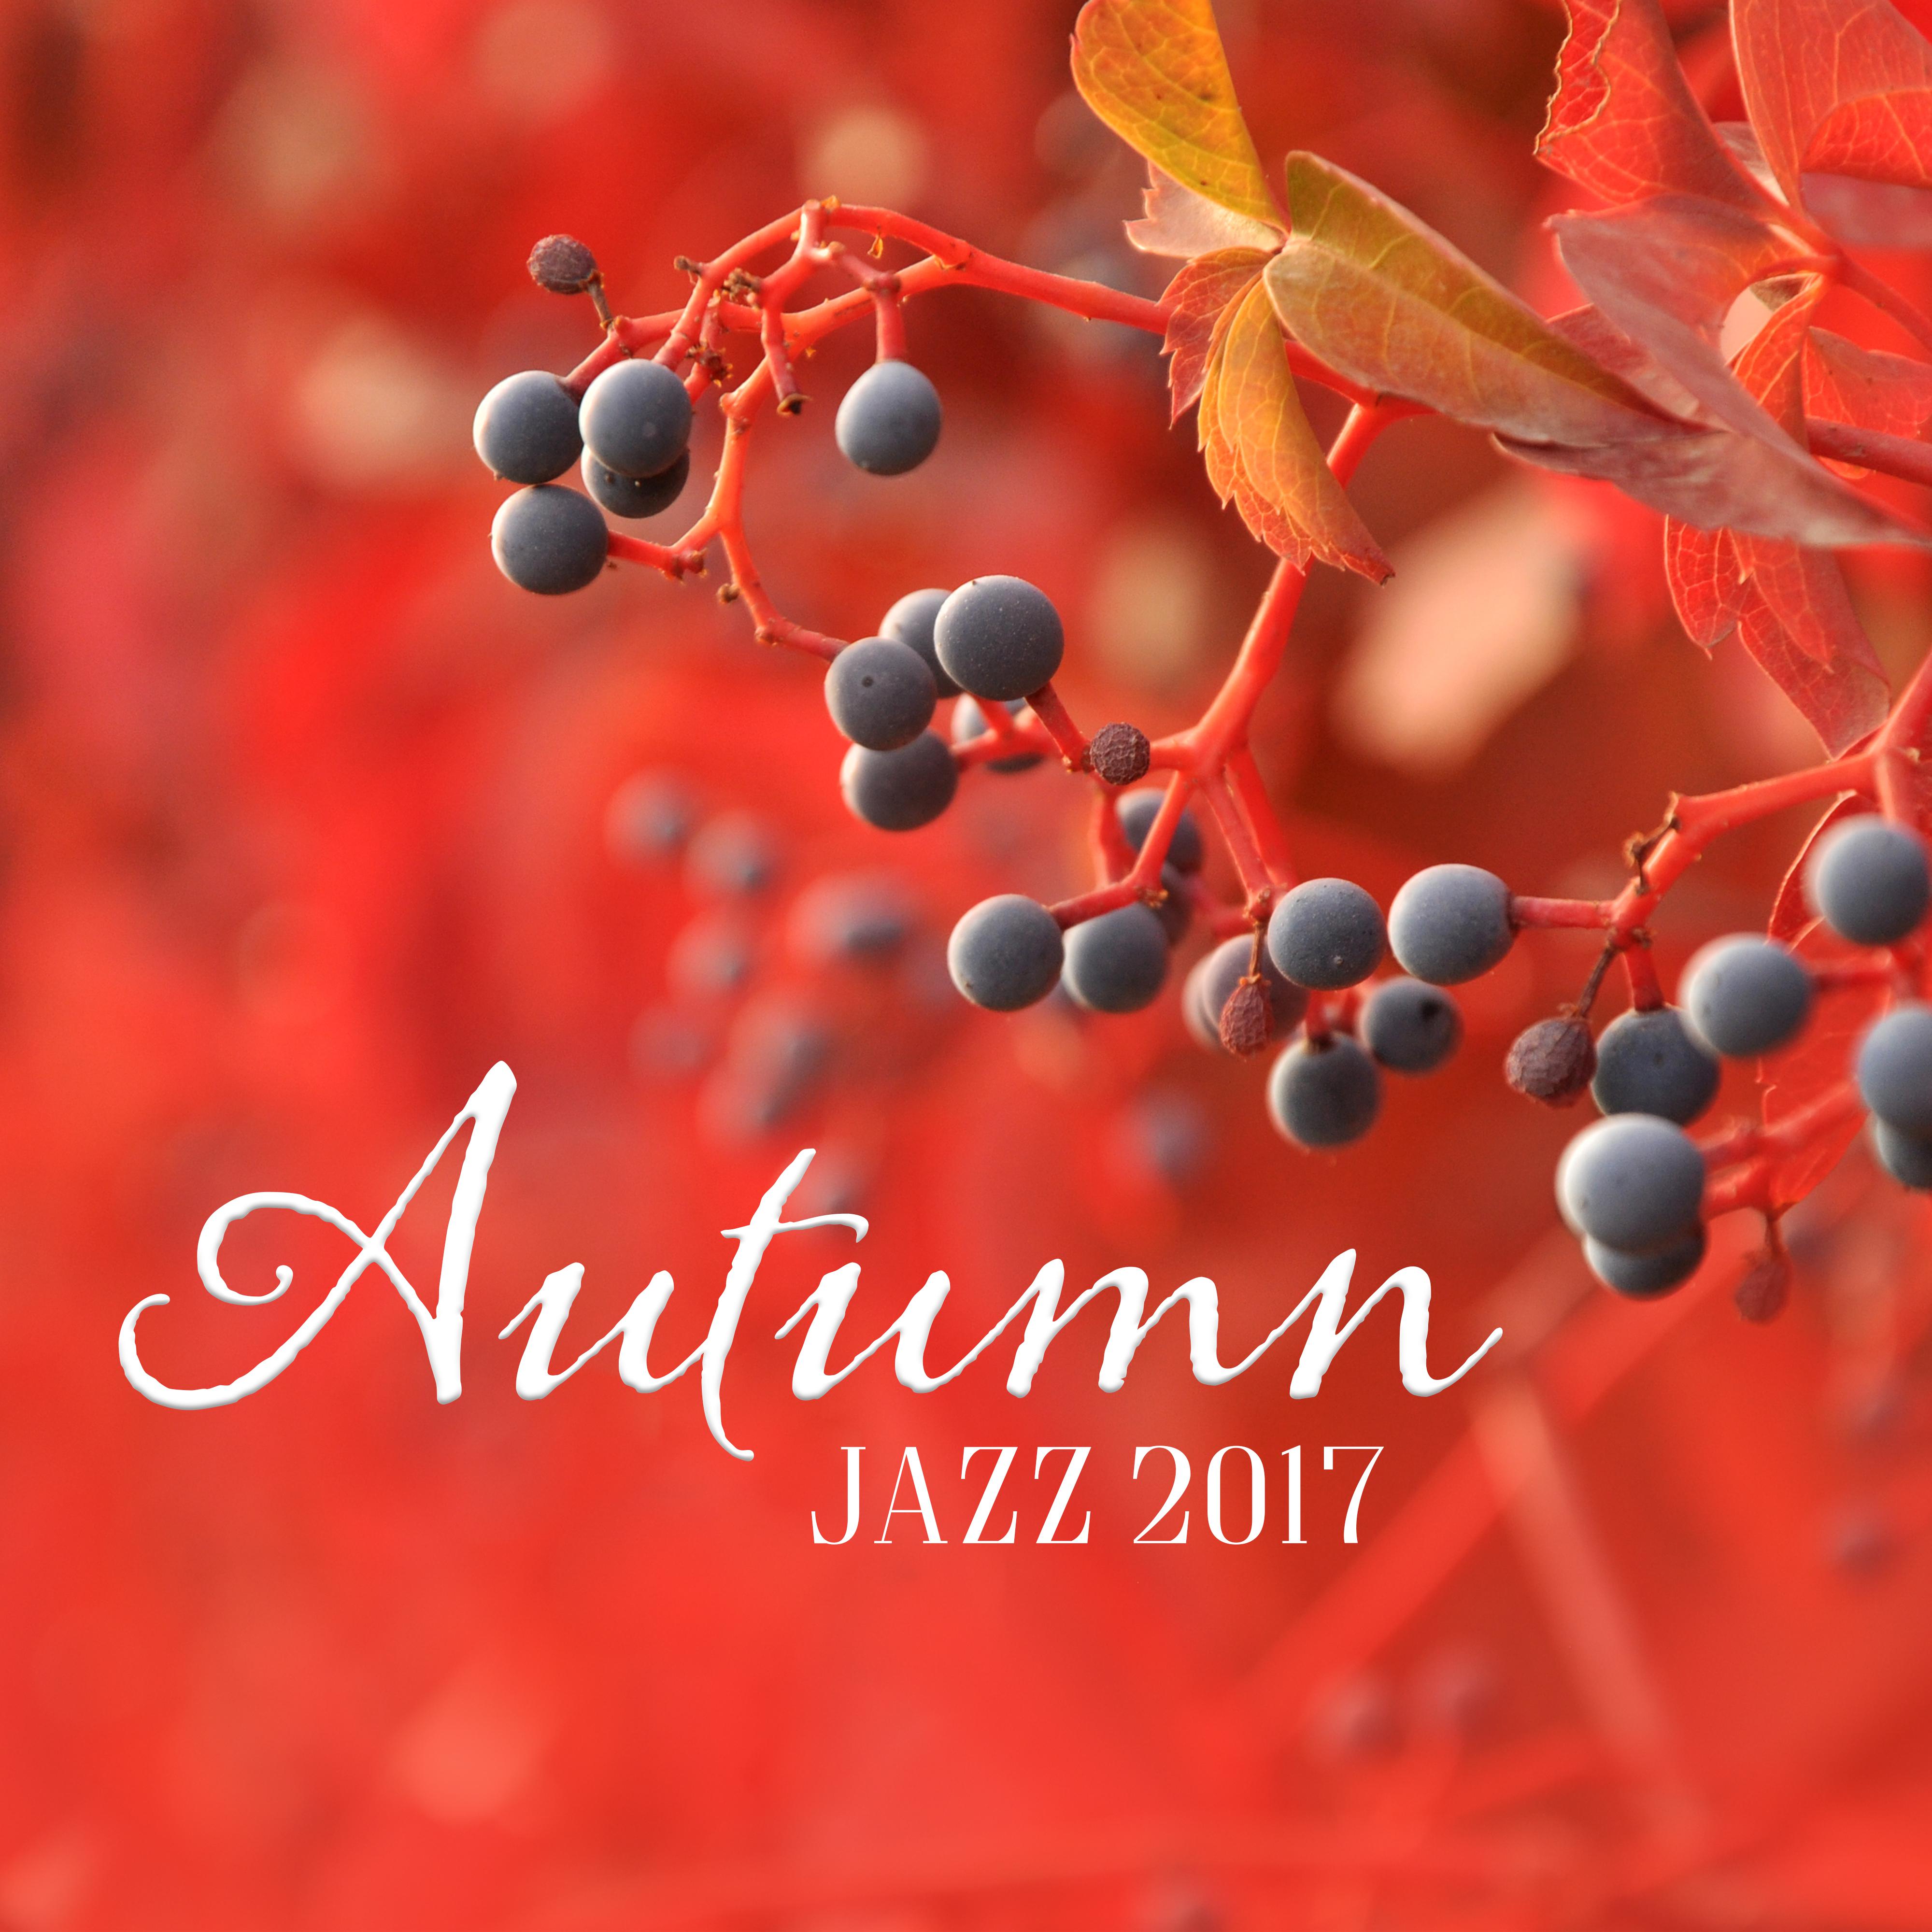 Autumn Jazz 2017 – Smooth Jazz, New Instrumental Music, Positive Sounds of Piano, Relaxing Jazz, Cafe Music